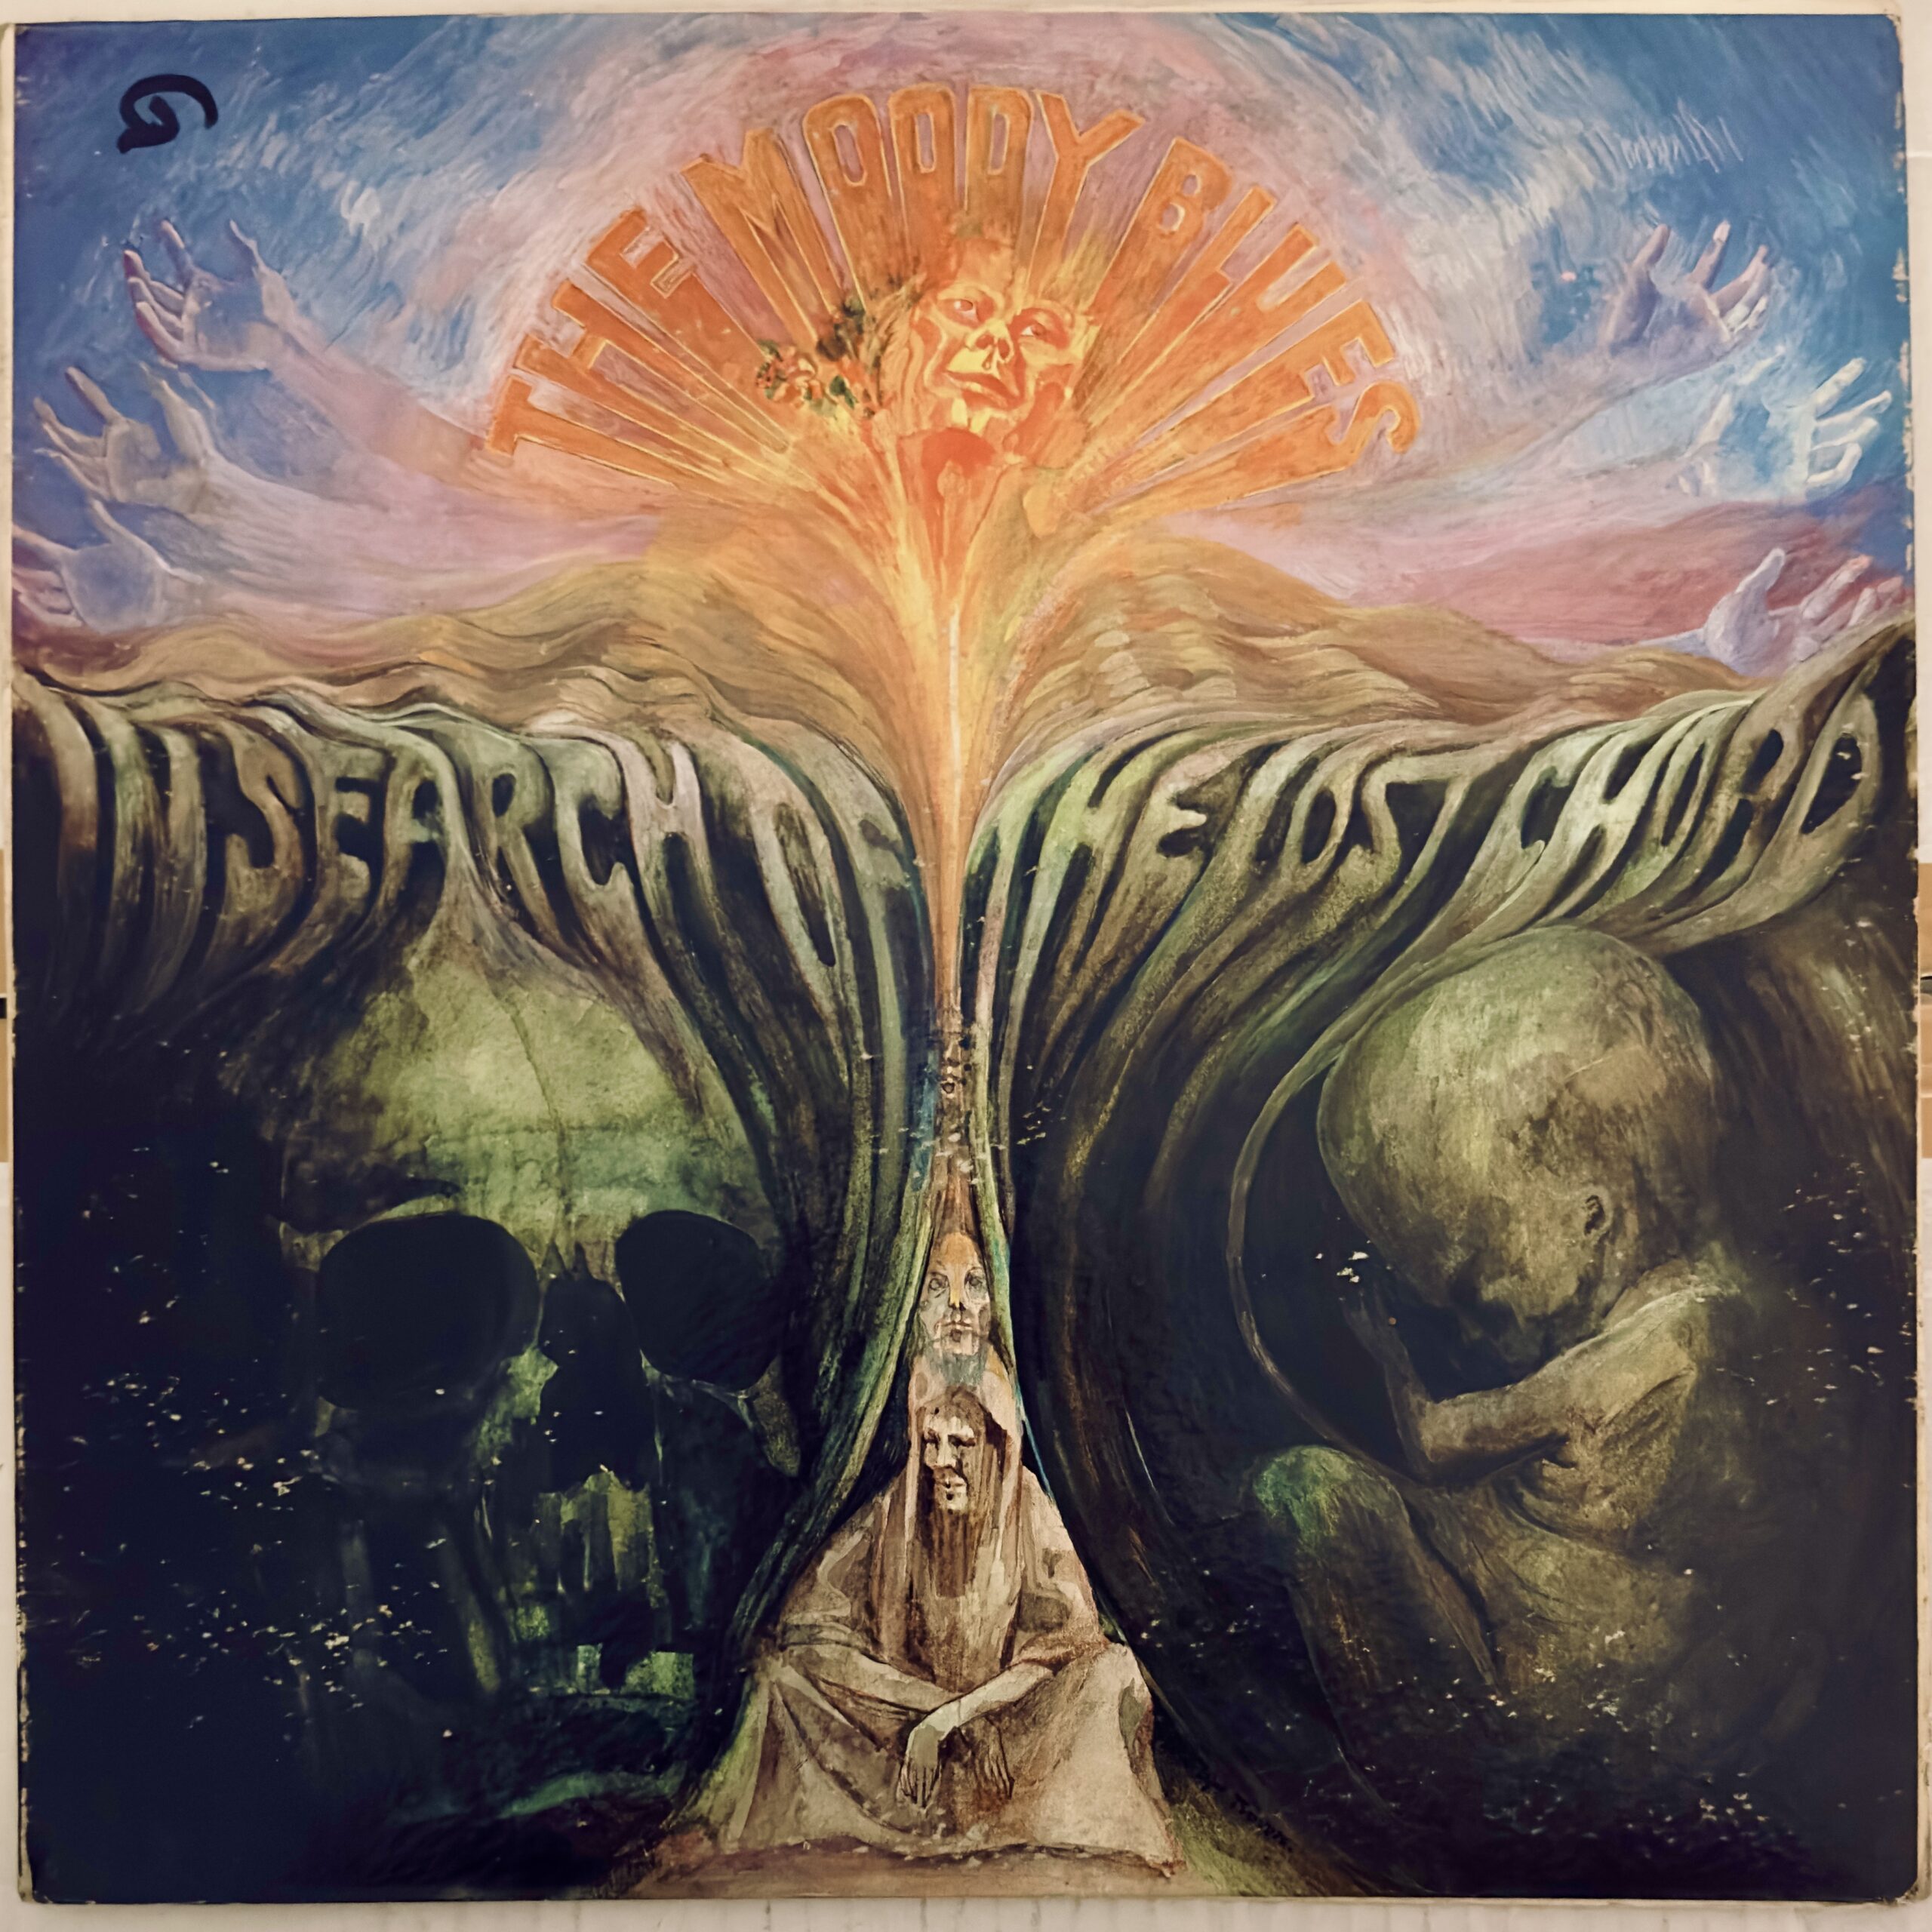 In Search of the Lost Chord by The Moody Blues